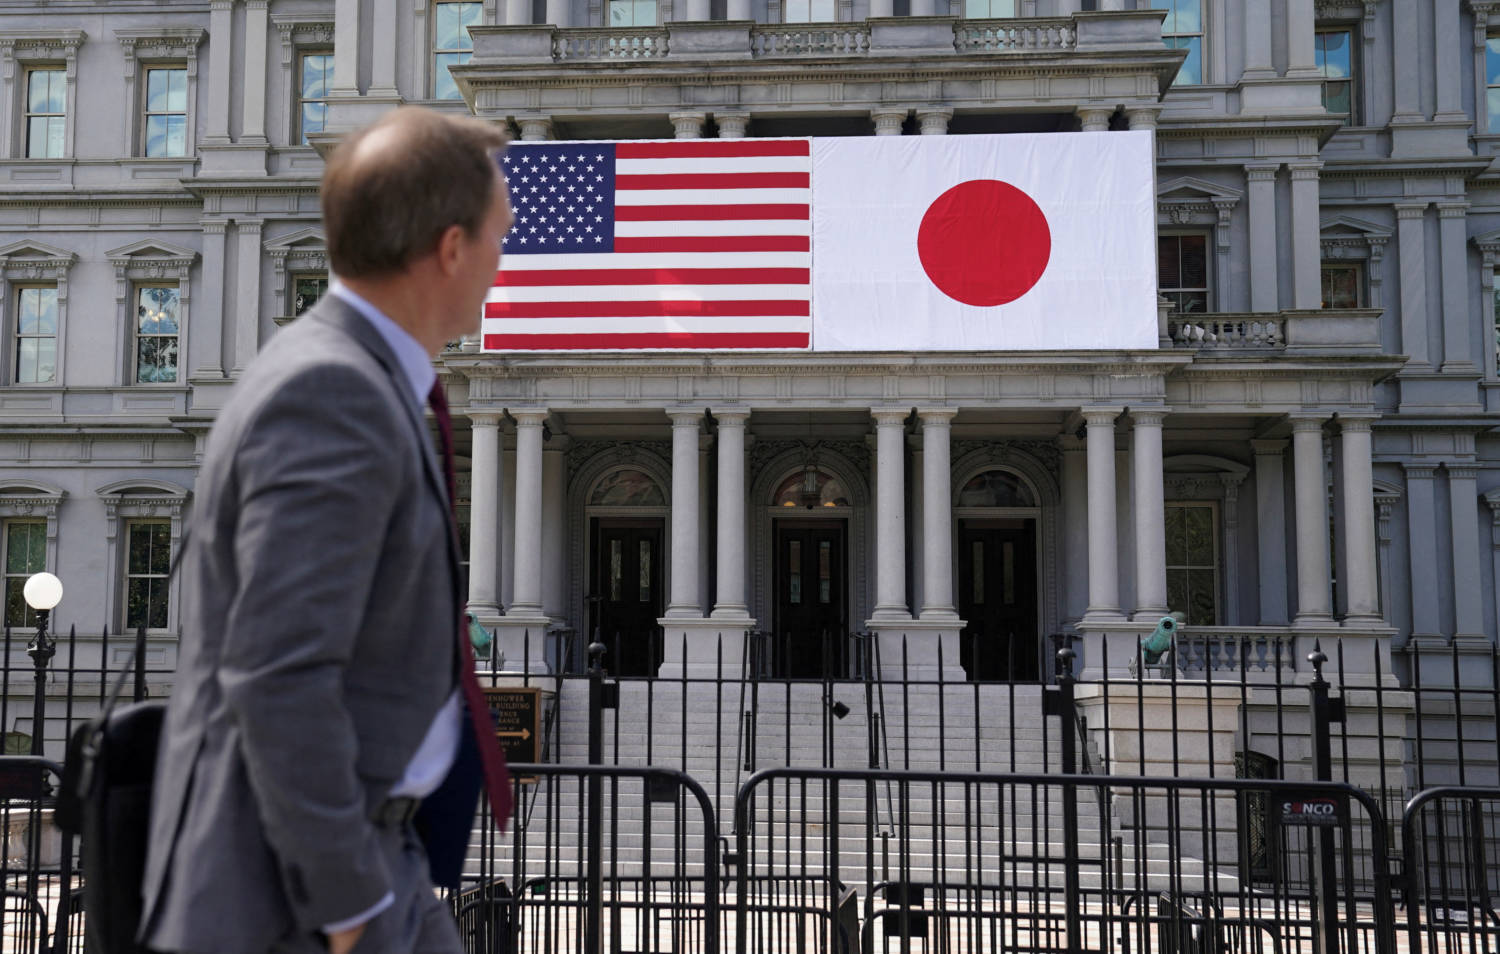 File Photo: Japanese And U.s. Flags Near The White House In Washington Ahead Of State Visit